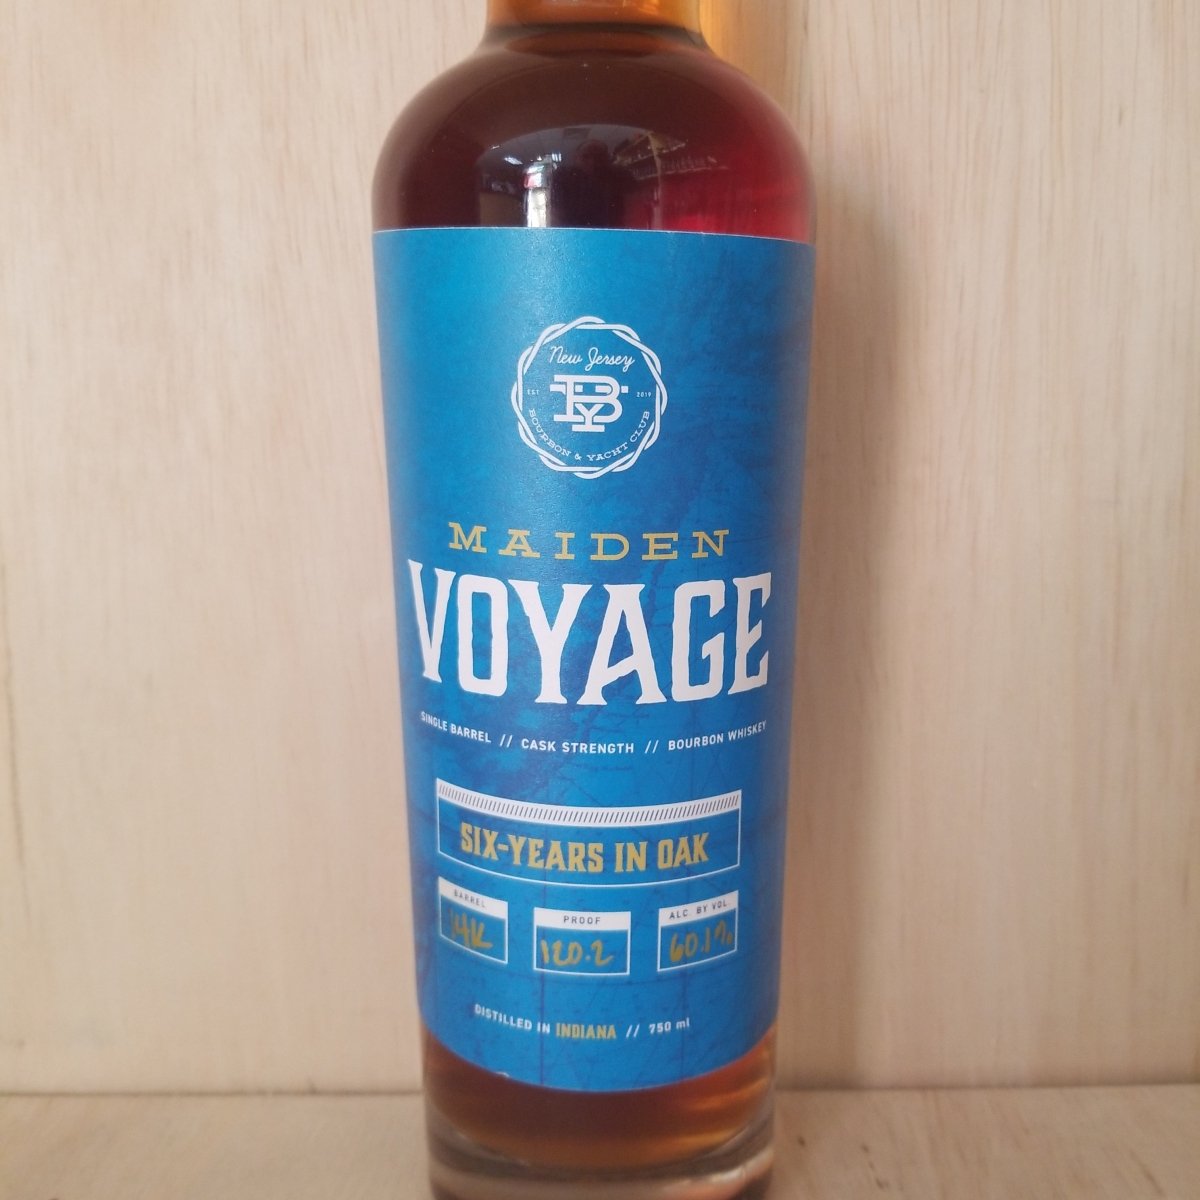 Maiden Voyage 6 Year Old Single Barrel Cask Strength Bourbon 750ml (proof 120.2) - Sip & Say